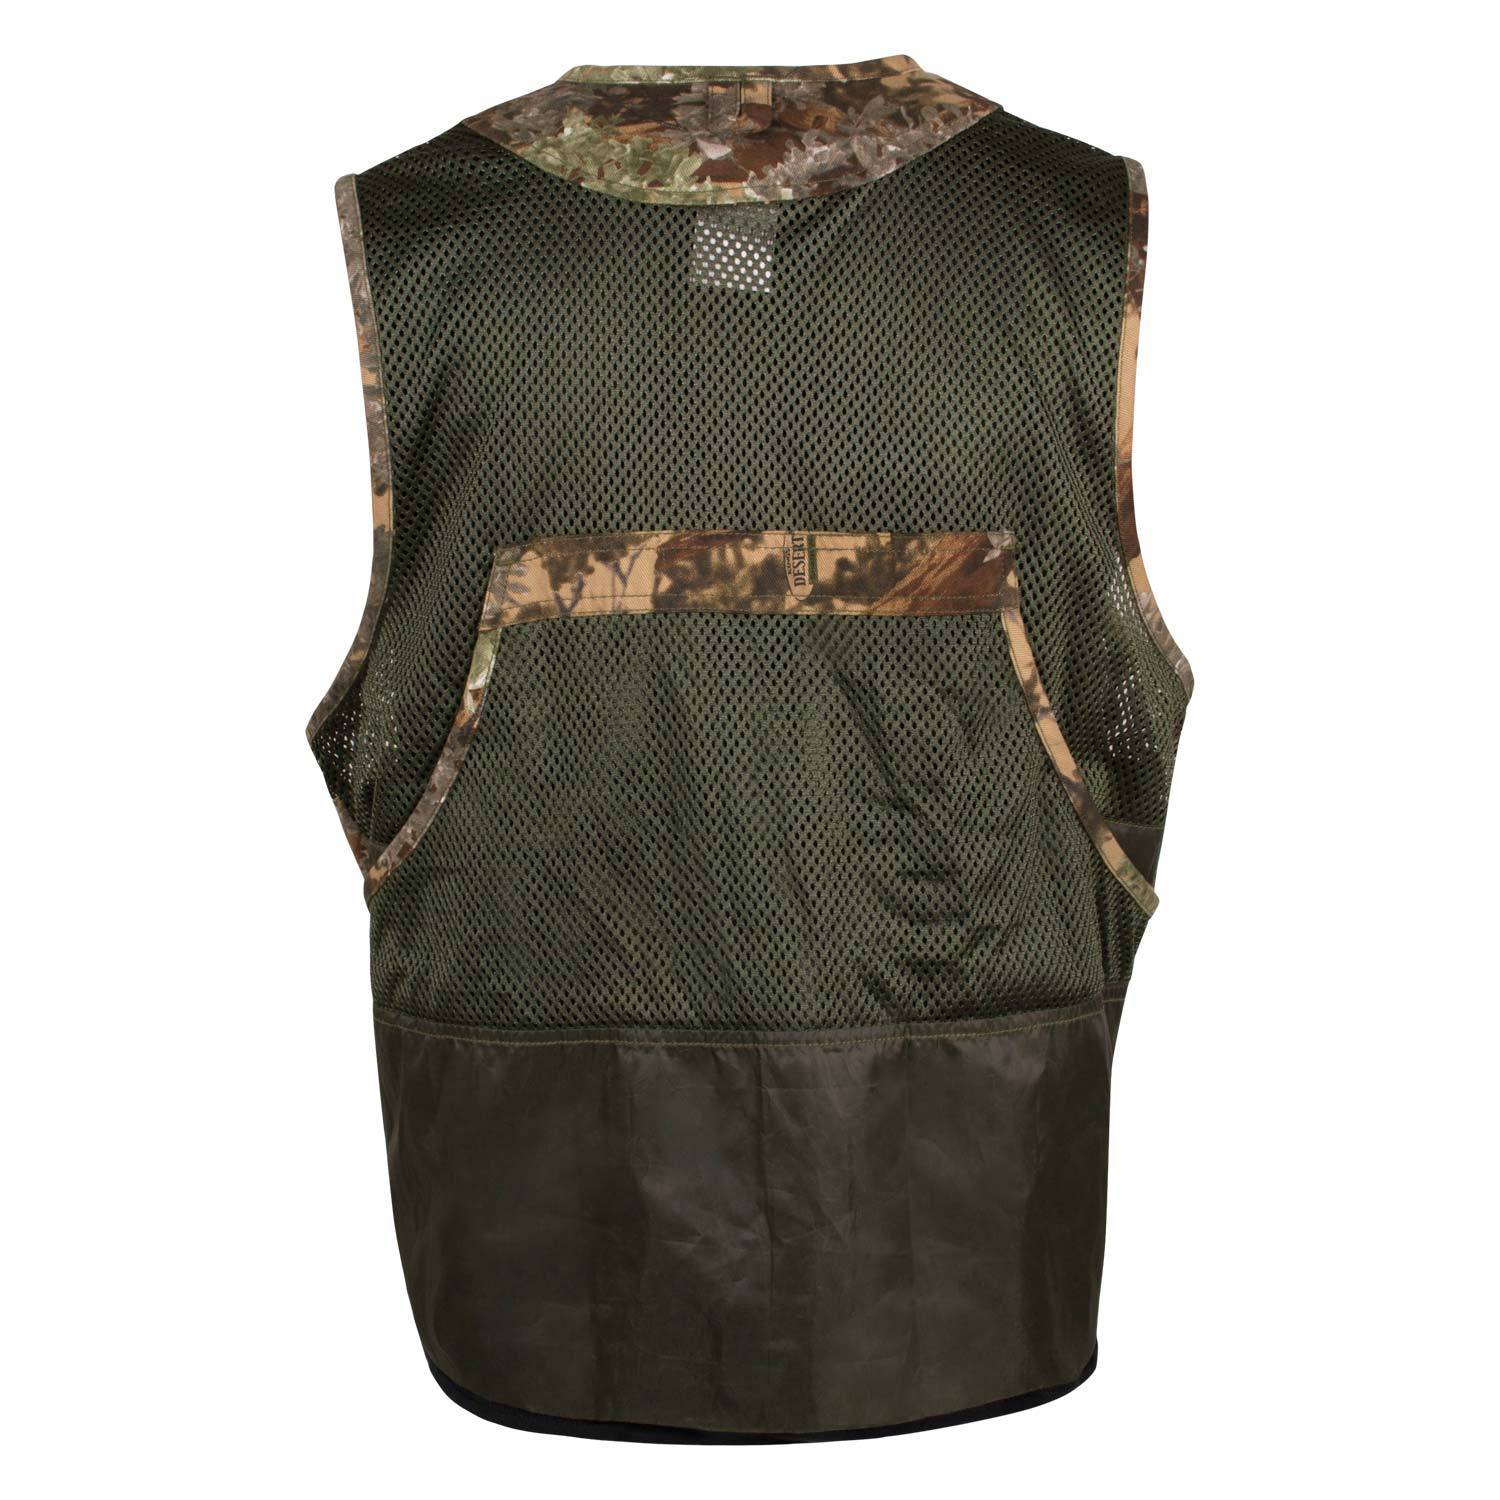 King's Upland Vest | King's Camo